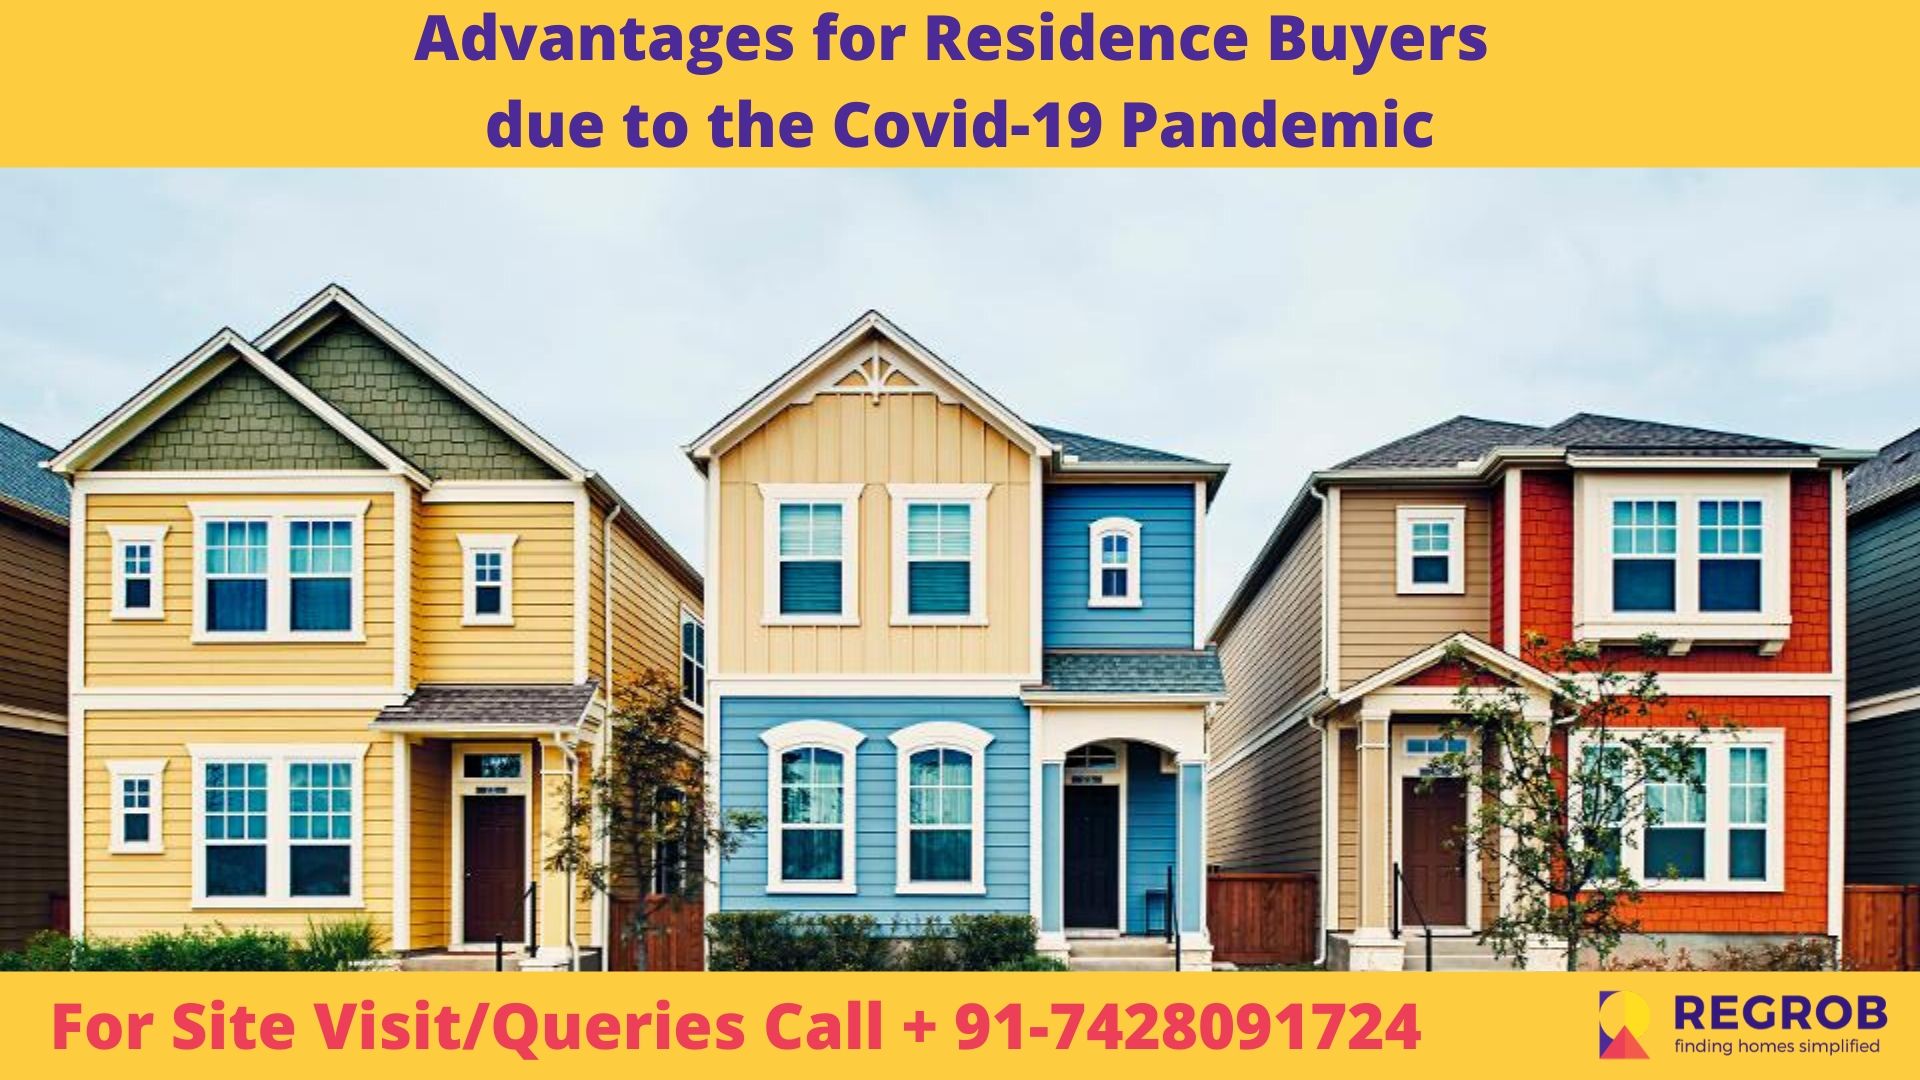 Advantages for Residence Buyers due to the Covid-19 Pandemic